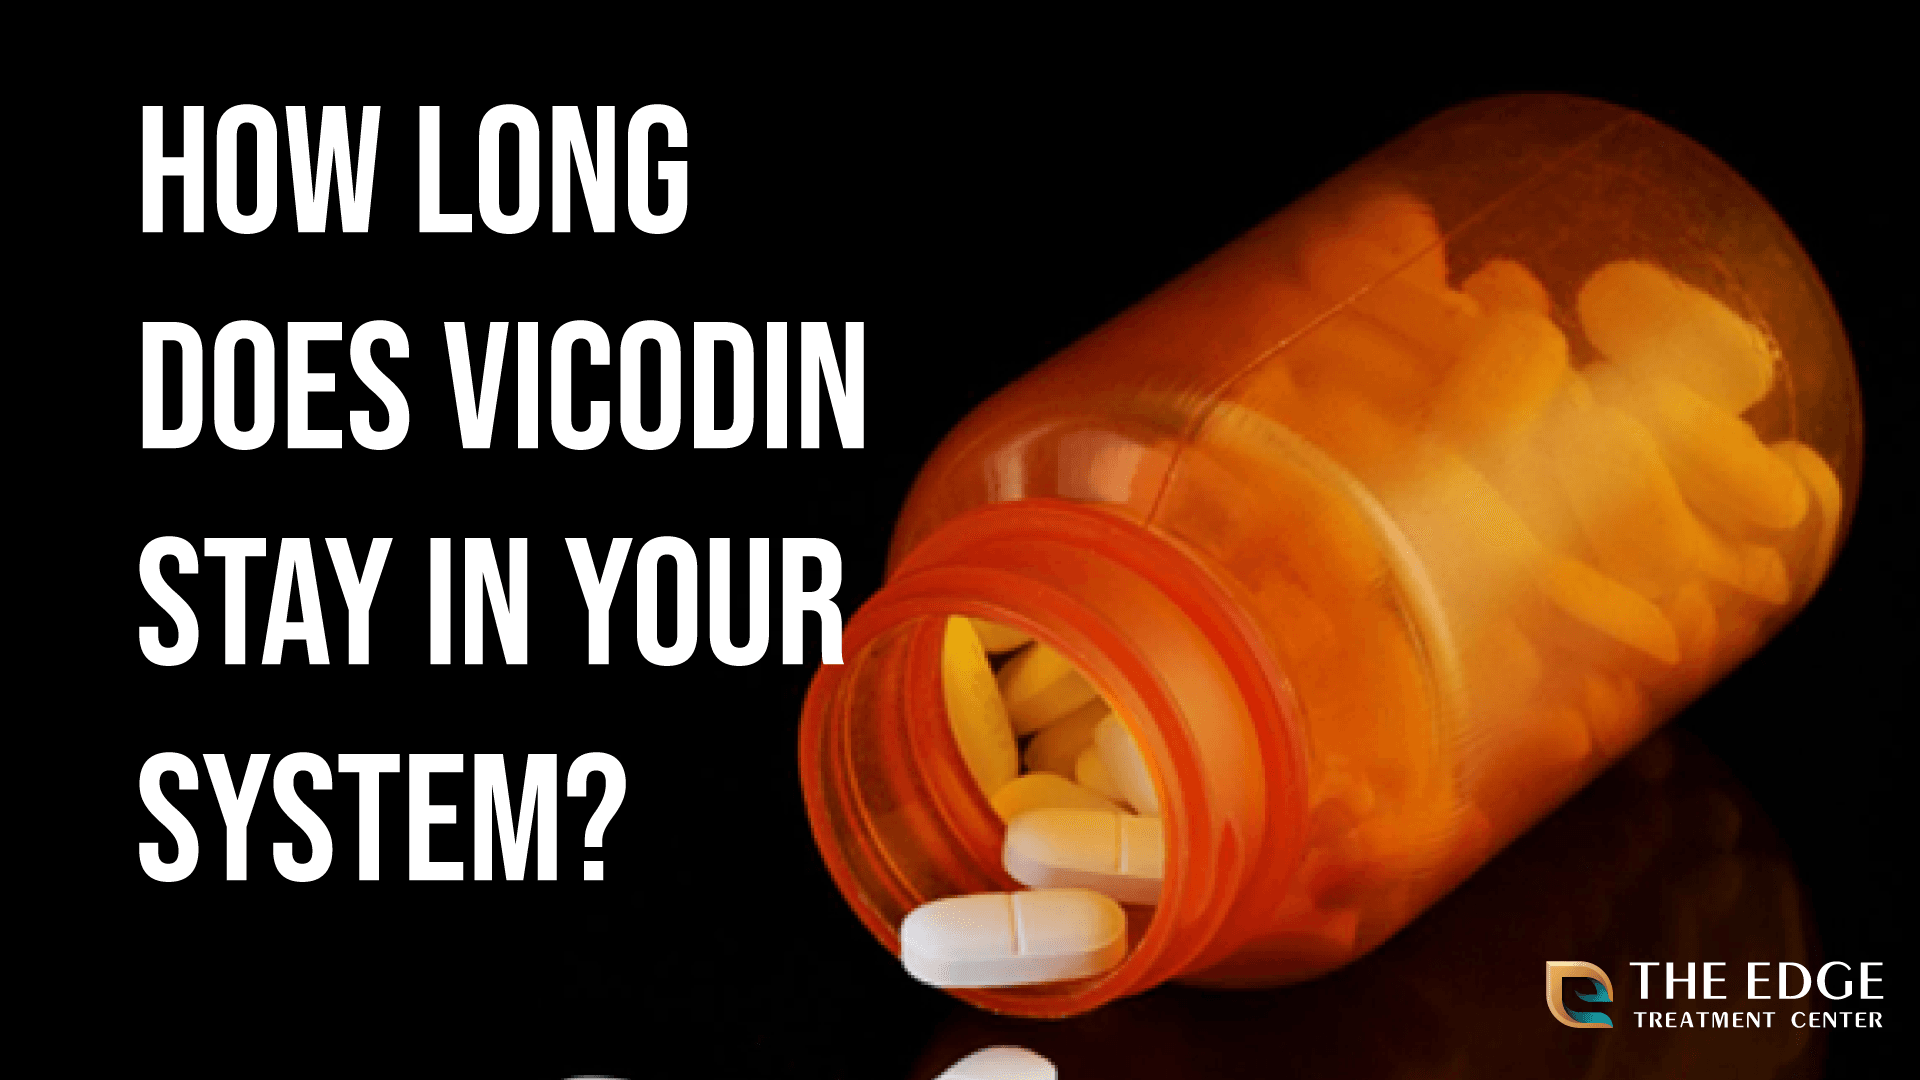 How Long Does Vicodin Stay in Your System